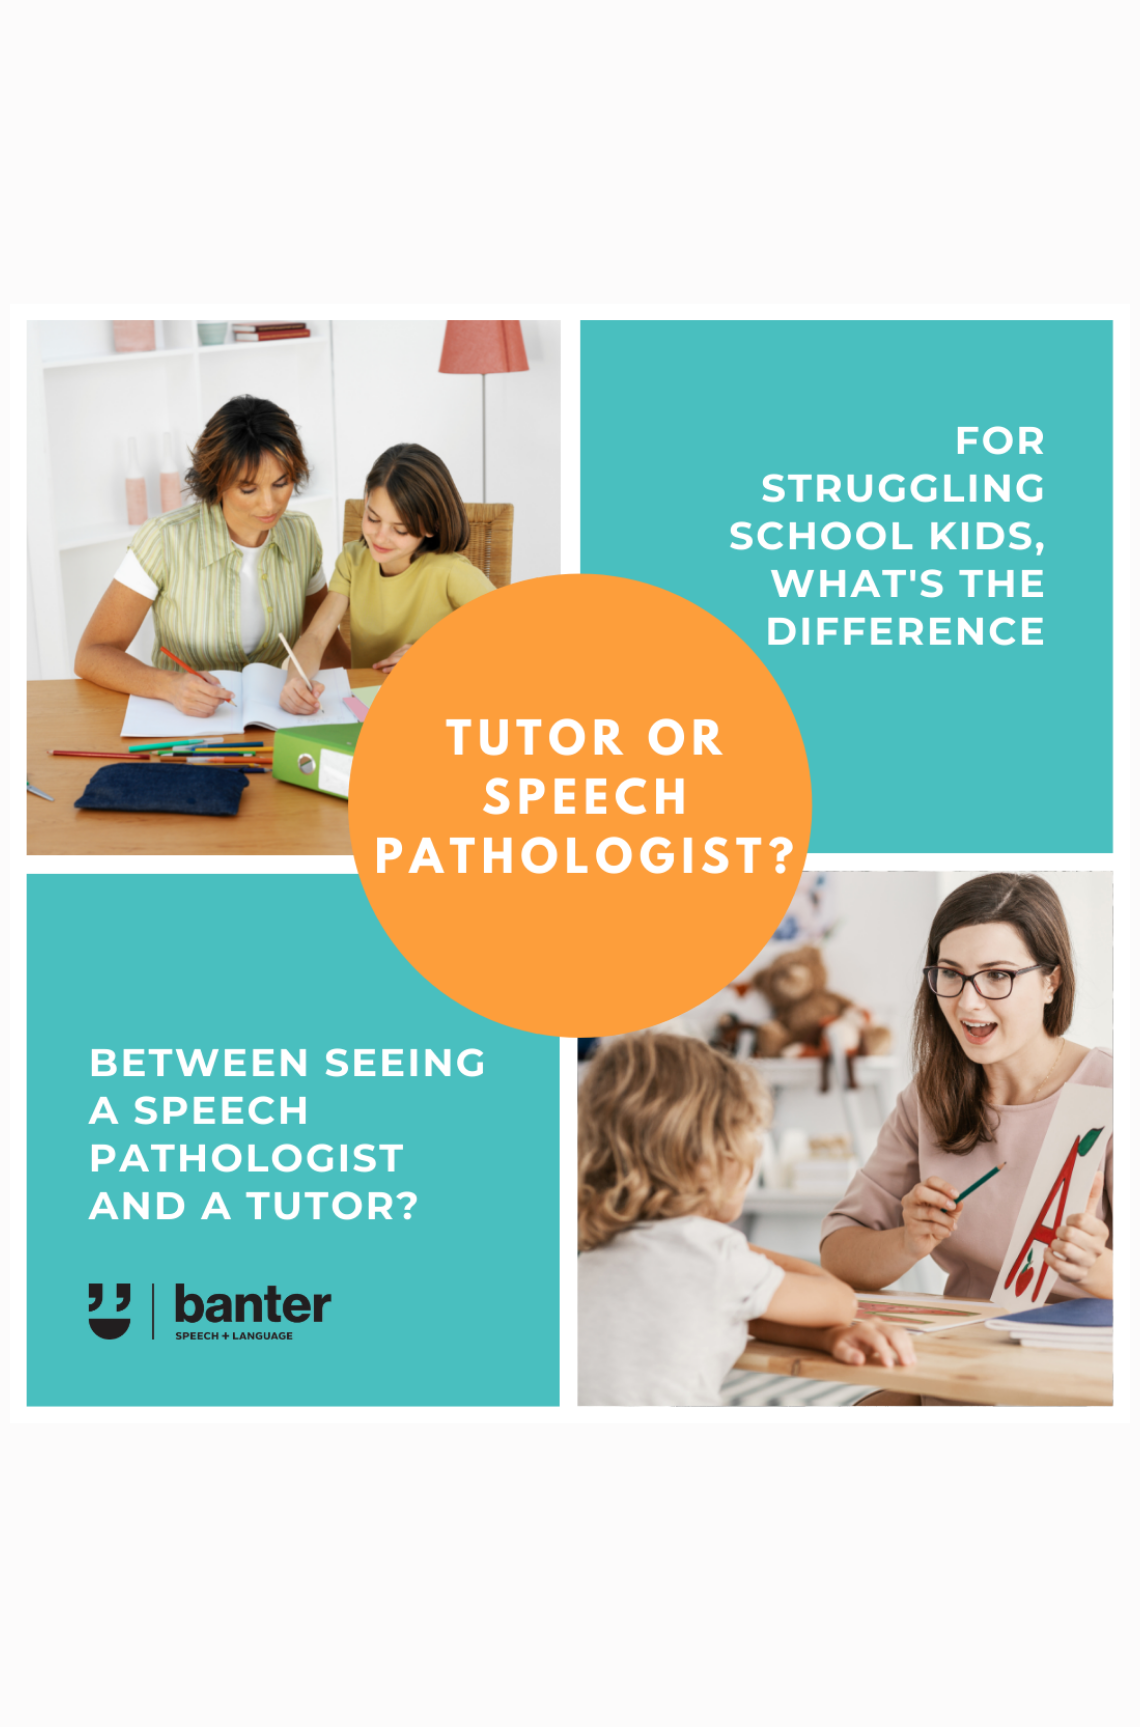 For struggling school kids, what's the difference between seeing a speech pathologist and a tutor?